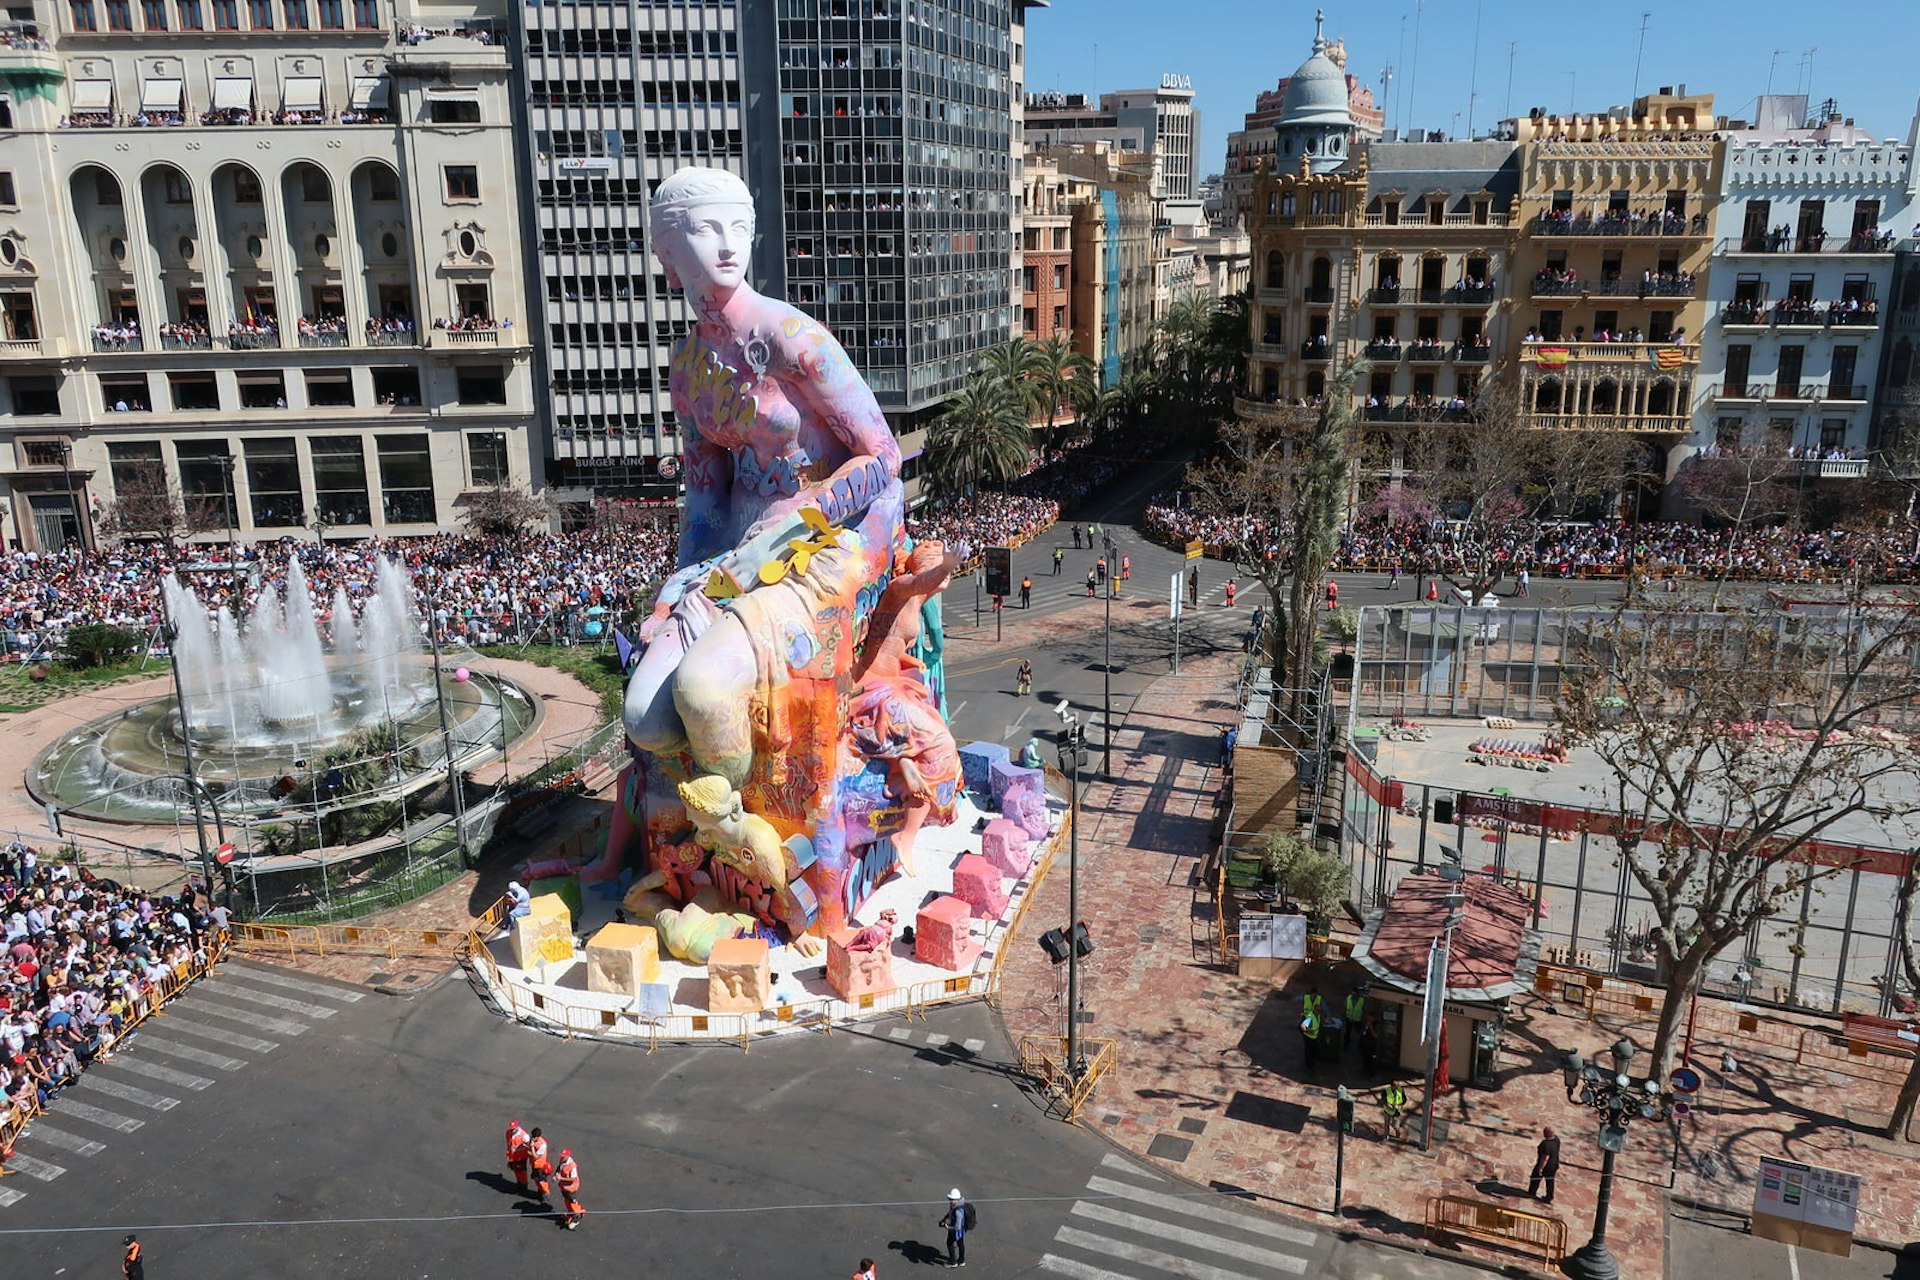 A massive, neoclassical-style sculpture of a woman, heavily covered in graffiti, stands in the middle of a large plaza, where crowds have gathered.